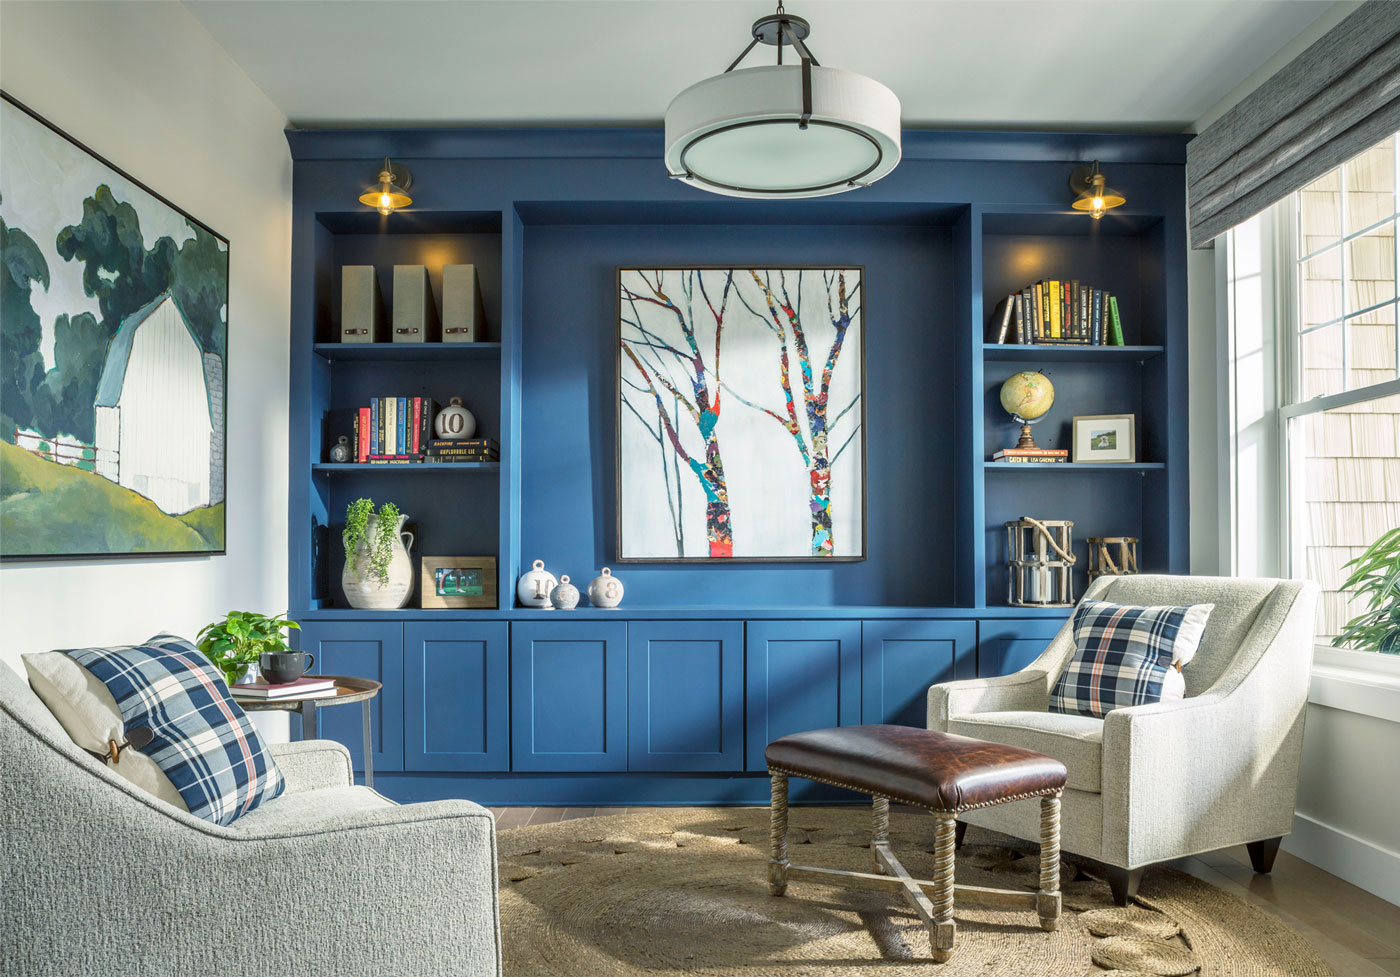 Blue accent wall with built-ins merchandised with comfortable chairs and complimenting finishes for cozy space in Vermont.